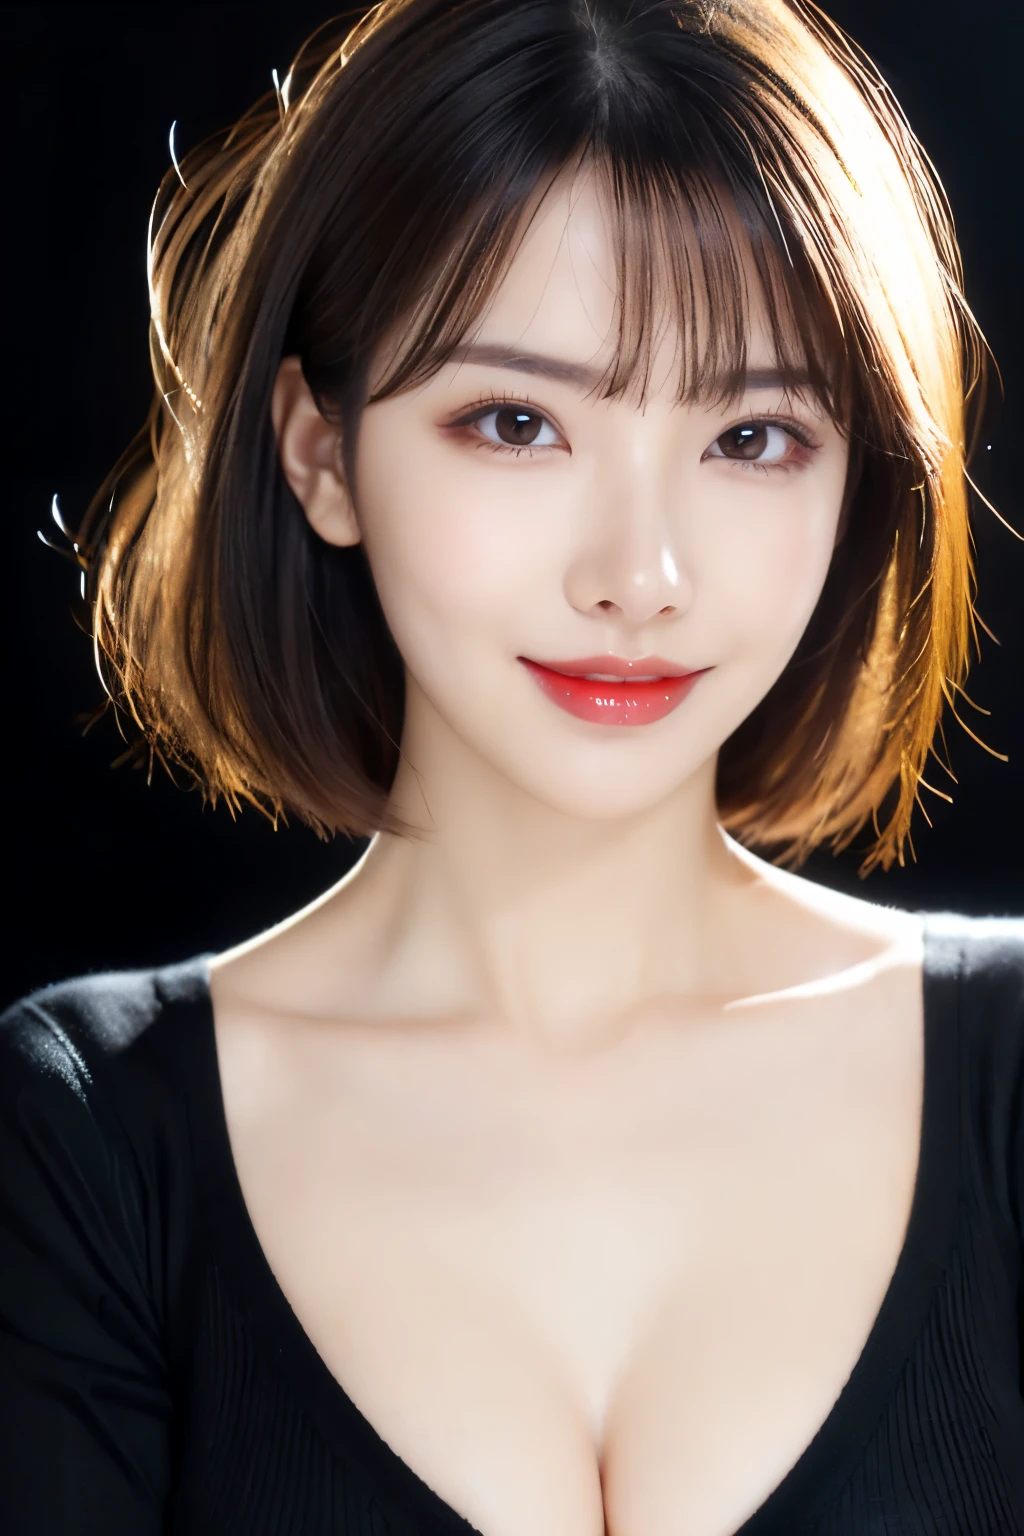 (Highest quality、Tabletop、8k、Best image quality、Award-winning works)、Cute beauty、(Short Bob Hair:1.1)、(The perfect all black V-neck long sleeve knit:1.5)、(The simplest pure black background:1.5)、(Face close-up:1.4)、(Very large breasts:1.2)、(Cleavage:1.2)、Accentuate your body lines、Beautiful and exquisite、Look at me and smile、(look straight at me:1.1)、(Perfect Makeup:1.1)、Bright lipstick、Ultra-high definition beauty face、Ultra HD Hair、Ultra HD Shining Eyes、Ultra High Resolution Perfect Teeth、Super high quality glossy lip、Accurate anatomy、Very beautiful skin、Ultra high resolution and beautiful, Glowing Skin、An elegant upright posture when viewed from the front